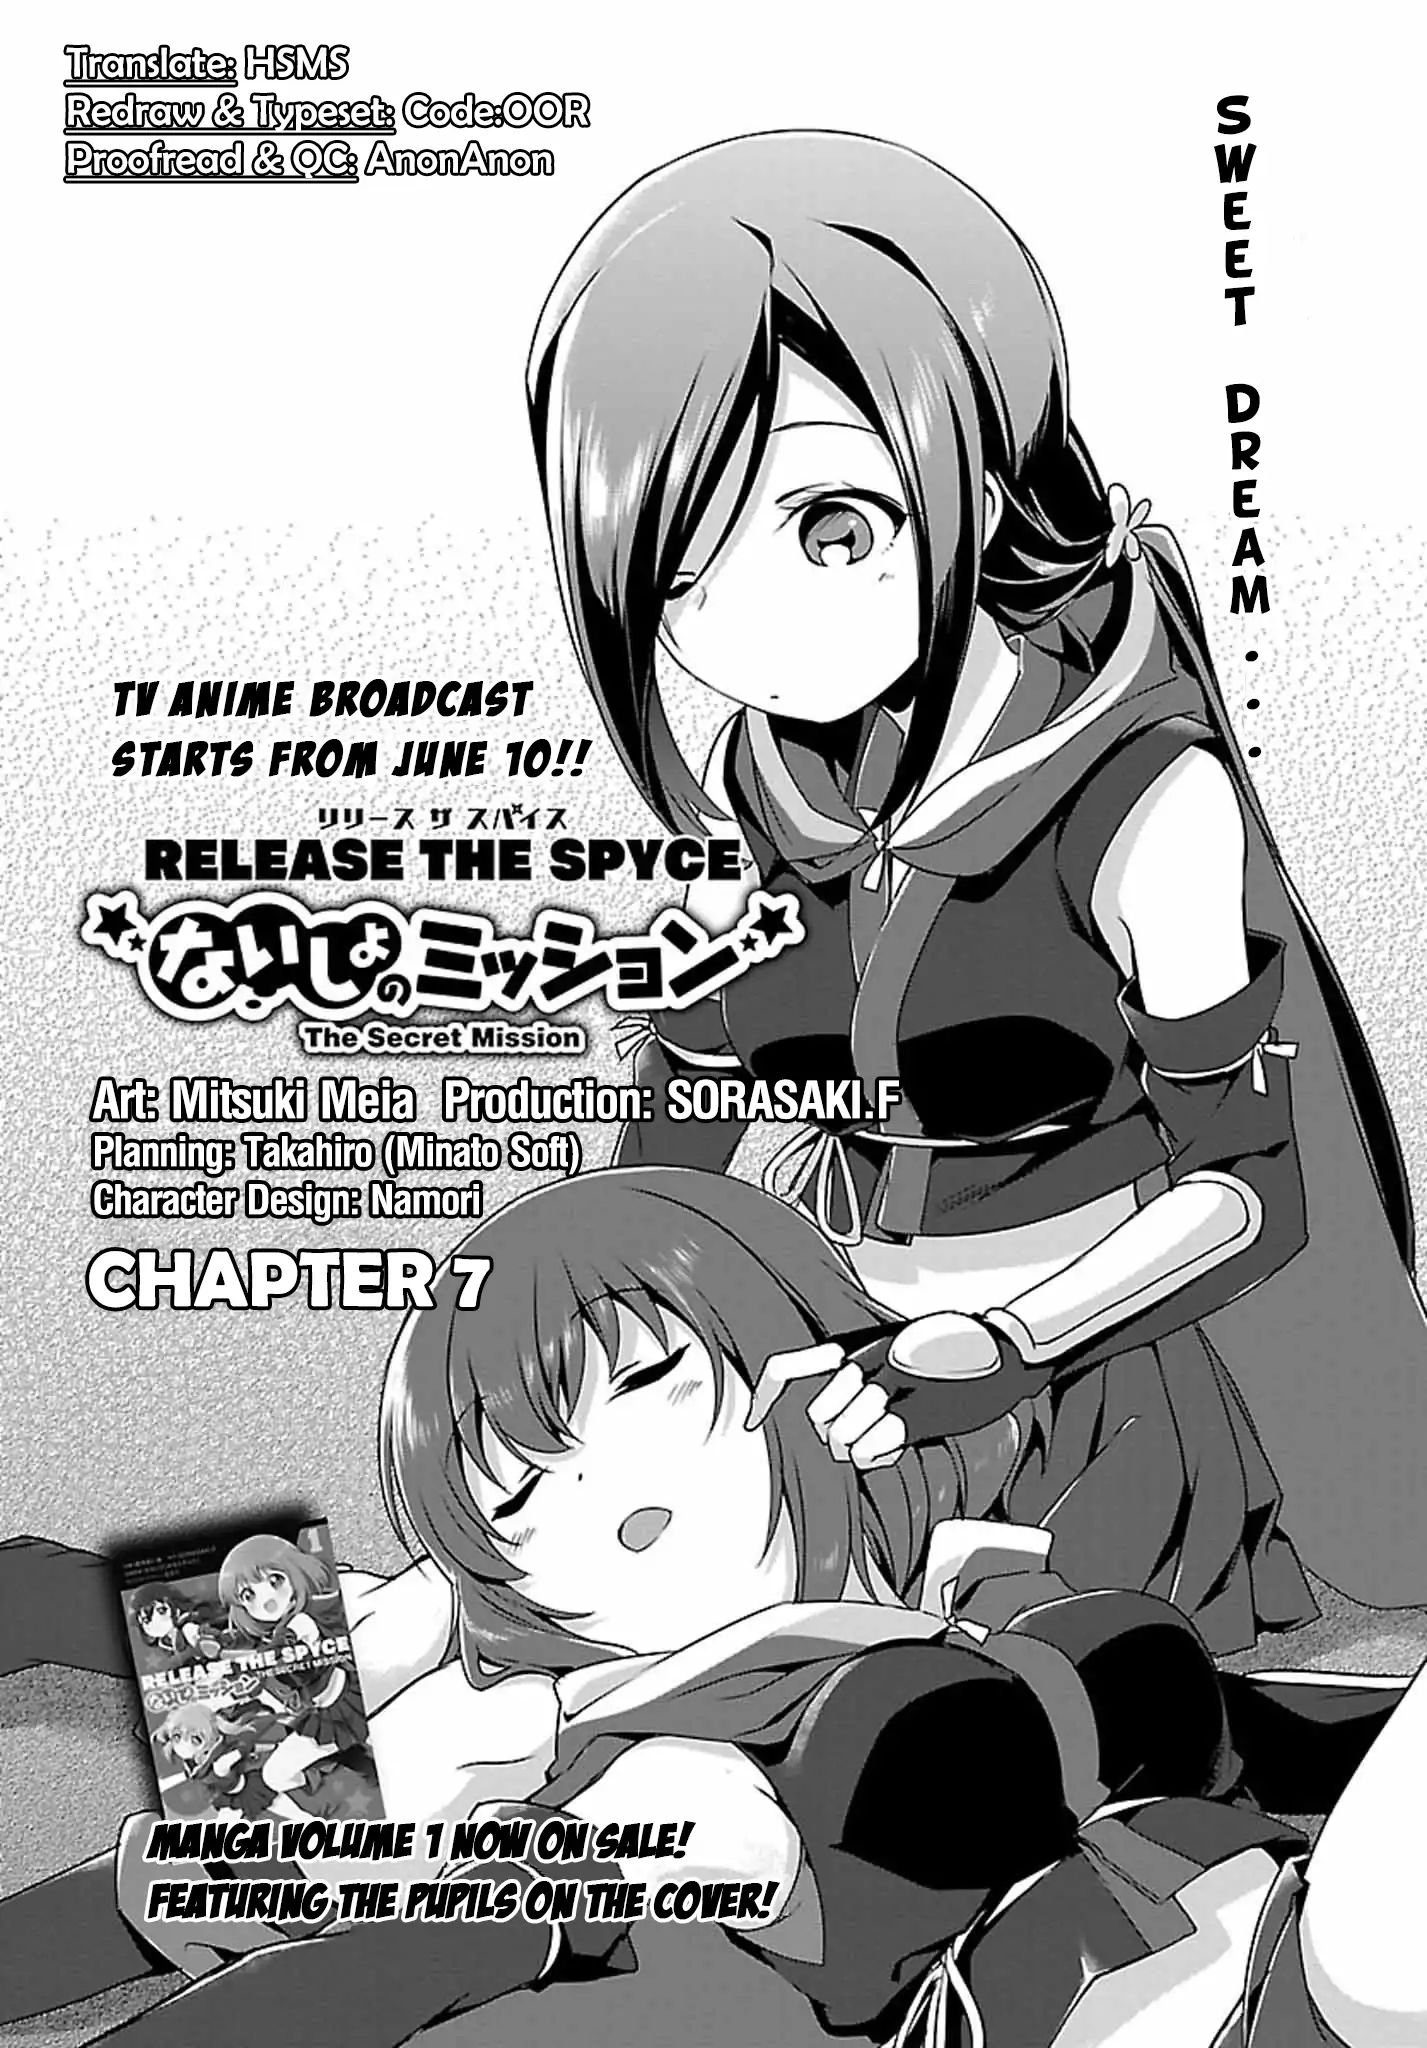 Release The Spyce - Secret Mission Chapter 7 #2